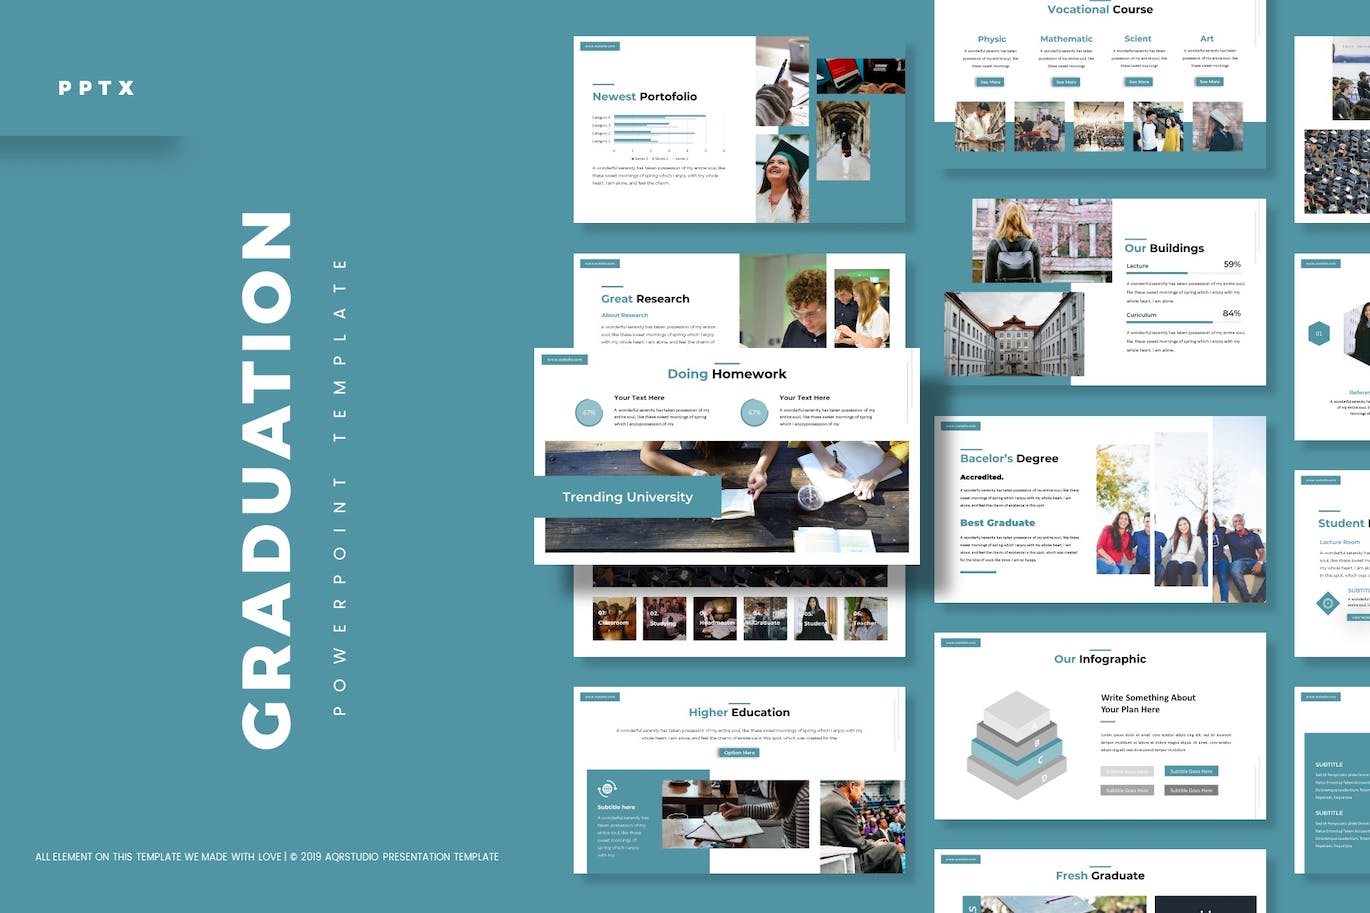 A set of images of amazing presentation template slides on the theme of graduation.